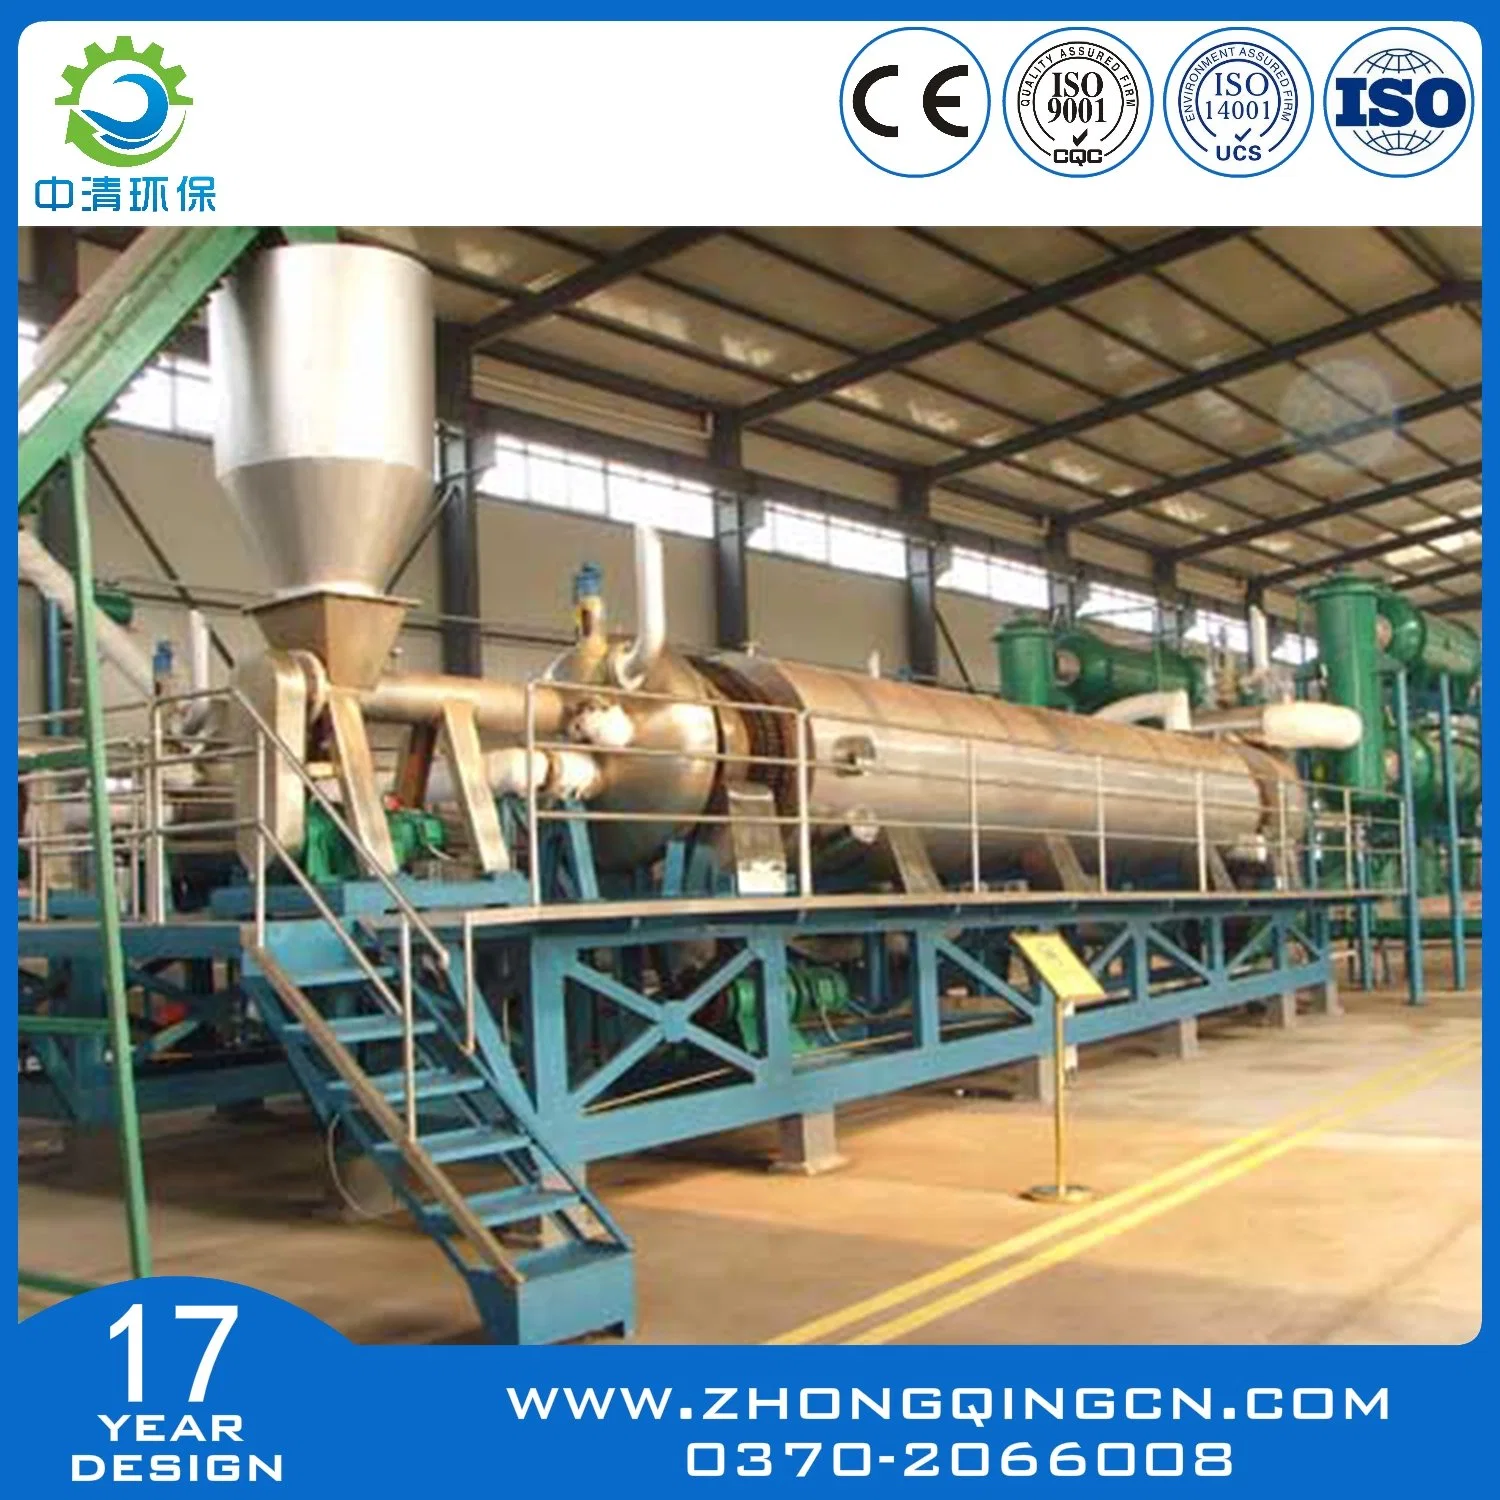 Domestic Garbage/Municipal Waste Disposal Machine/Pyrolysis Plant to Diesel Oil with CE, SGS, ISO, BV